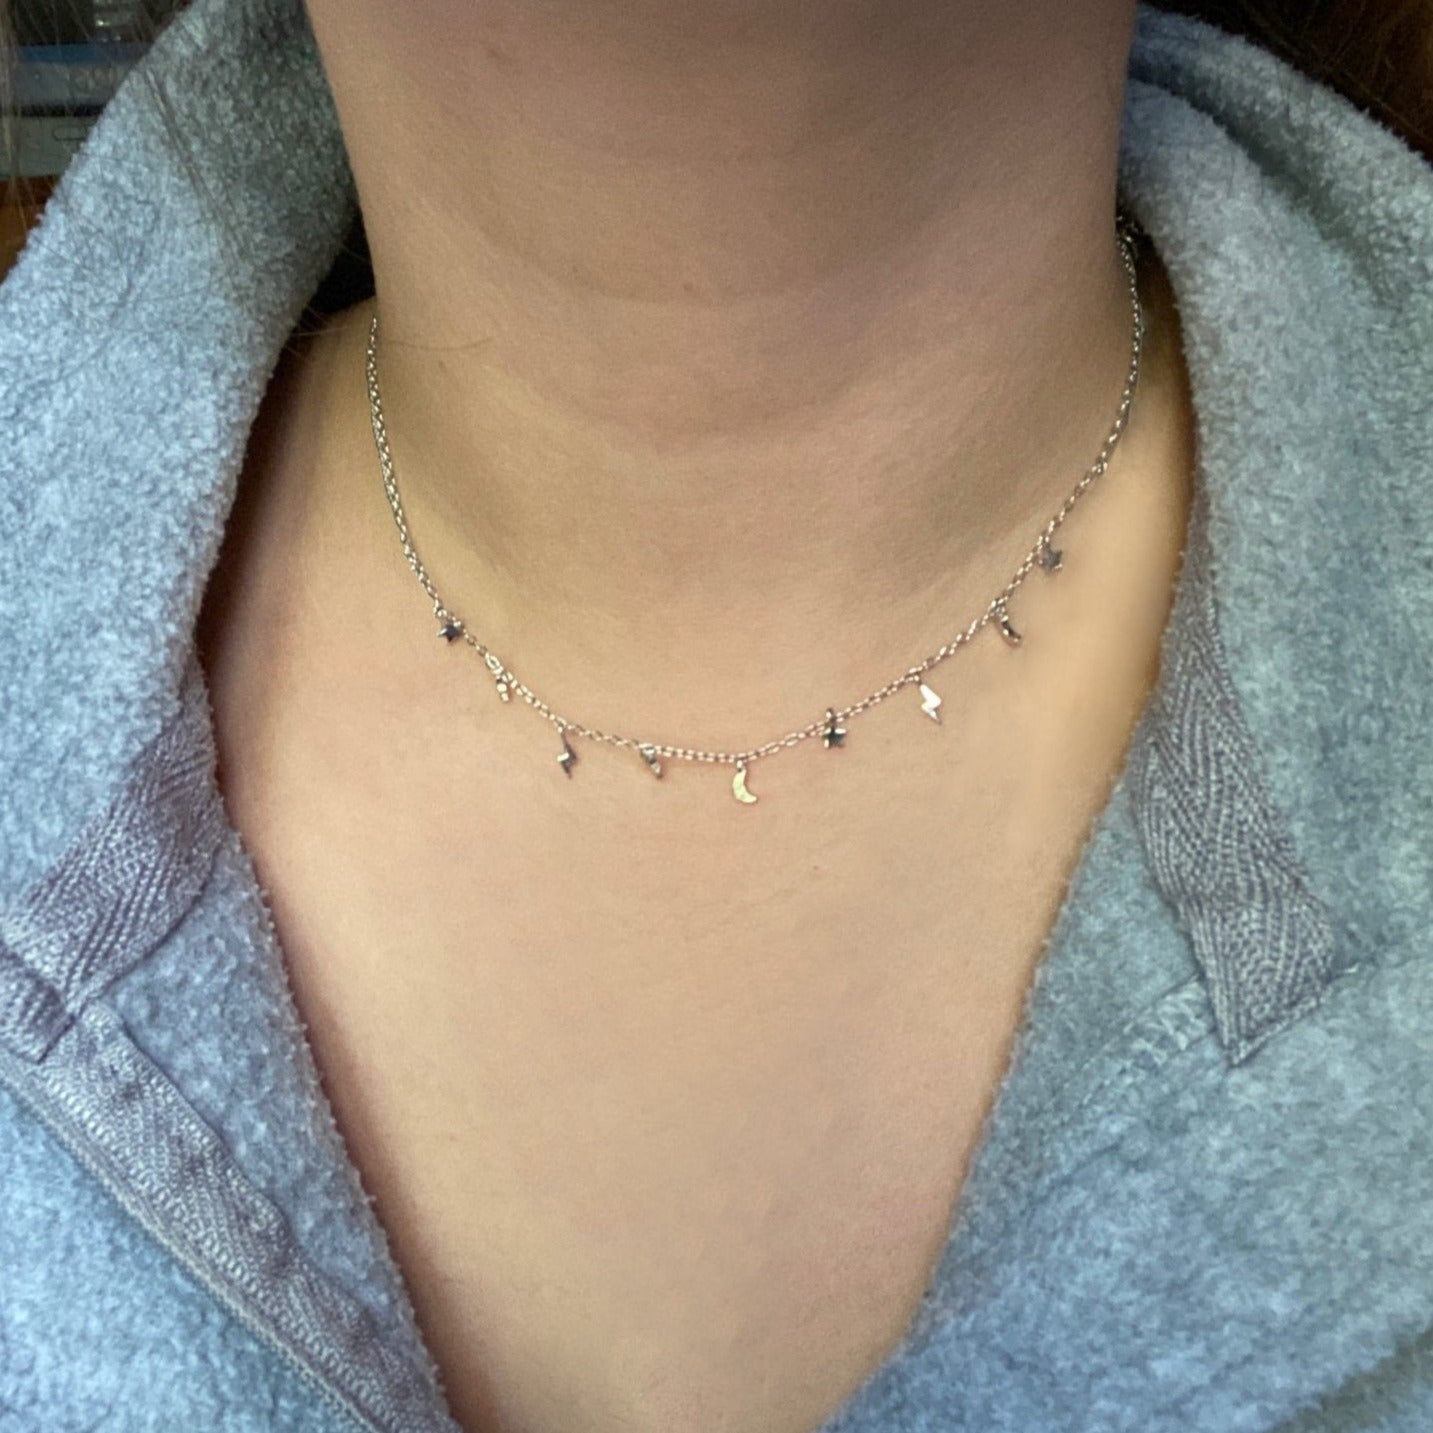 A woman wearing a delicate celestial necklace.